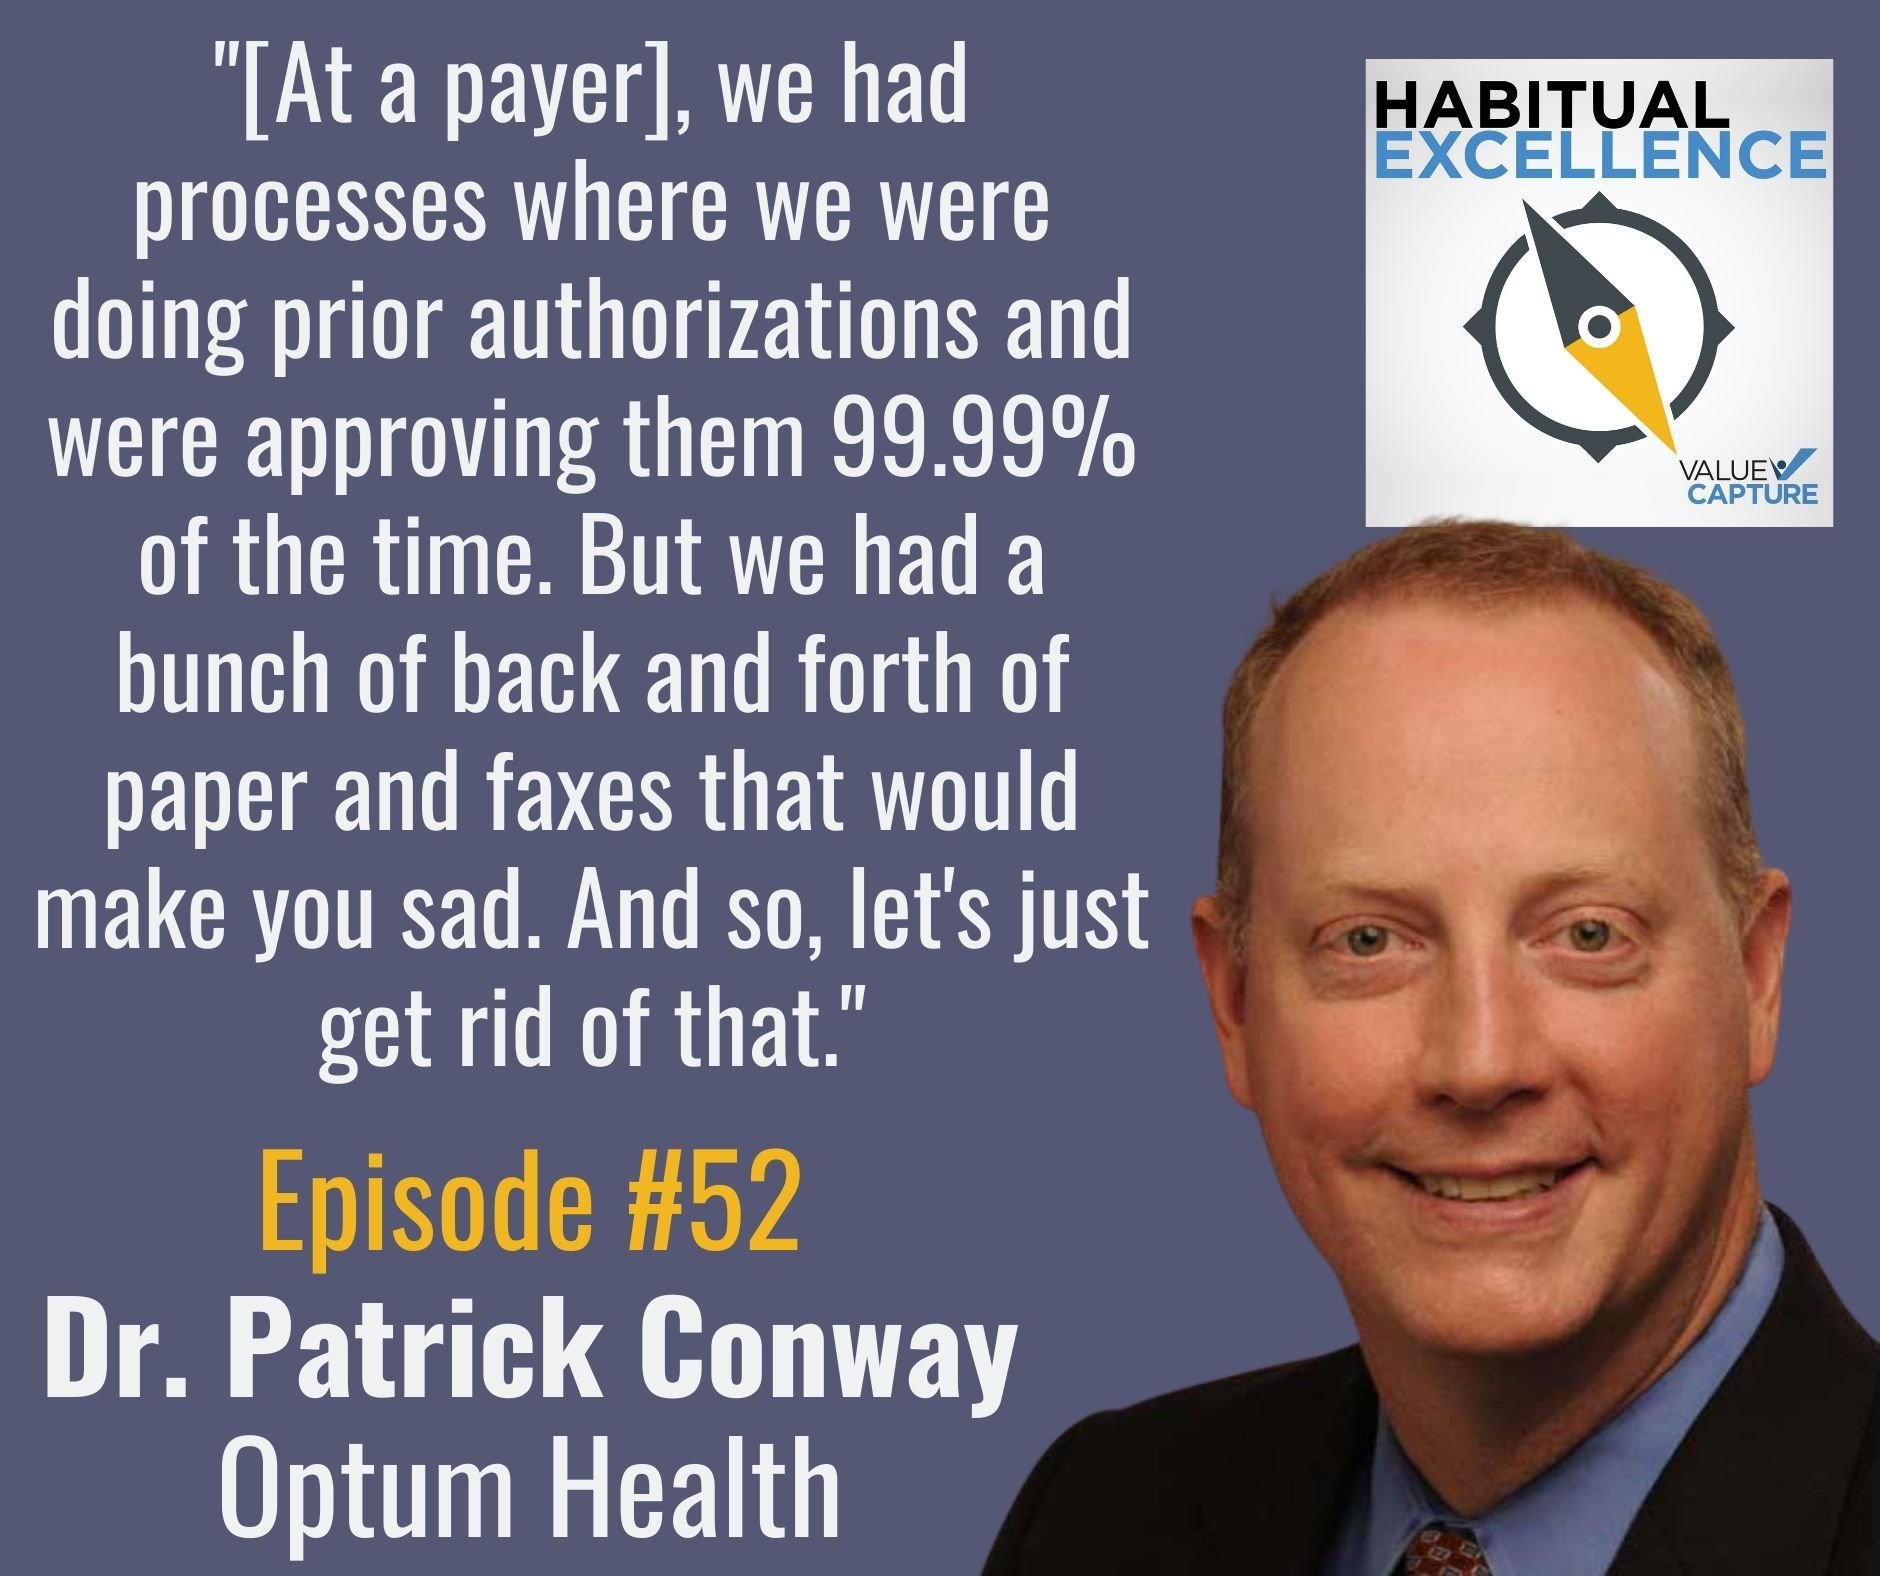 "[At a payer], we had processes where we were doing prior authorizations and were approving them 99.99% of the time. But we had a bunch of back and forth of paper and faxes that would make you sad. And so, let's just get rid of that."